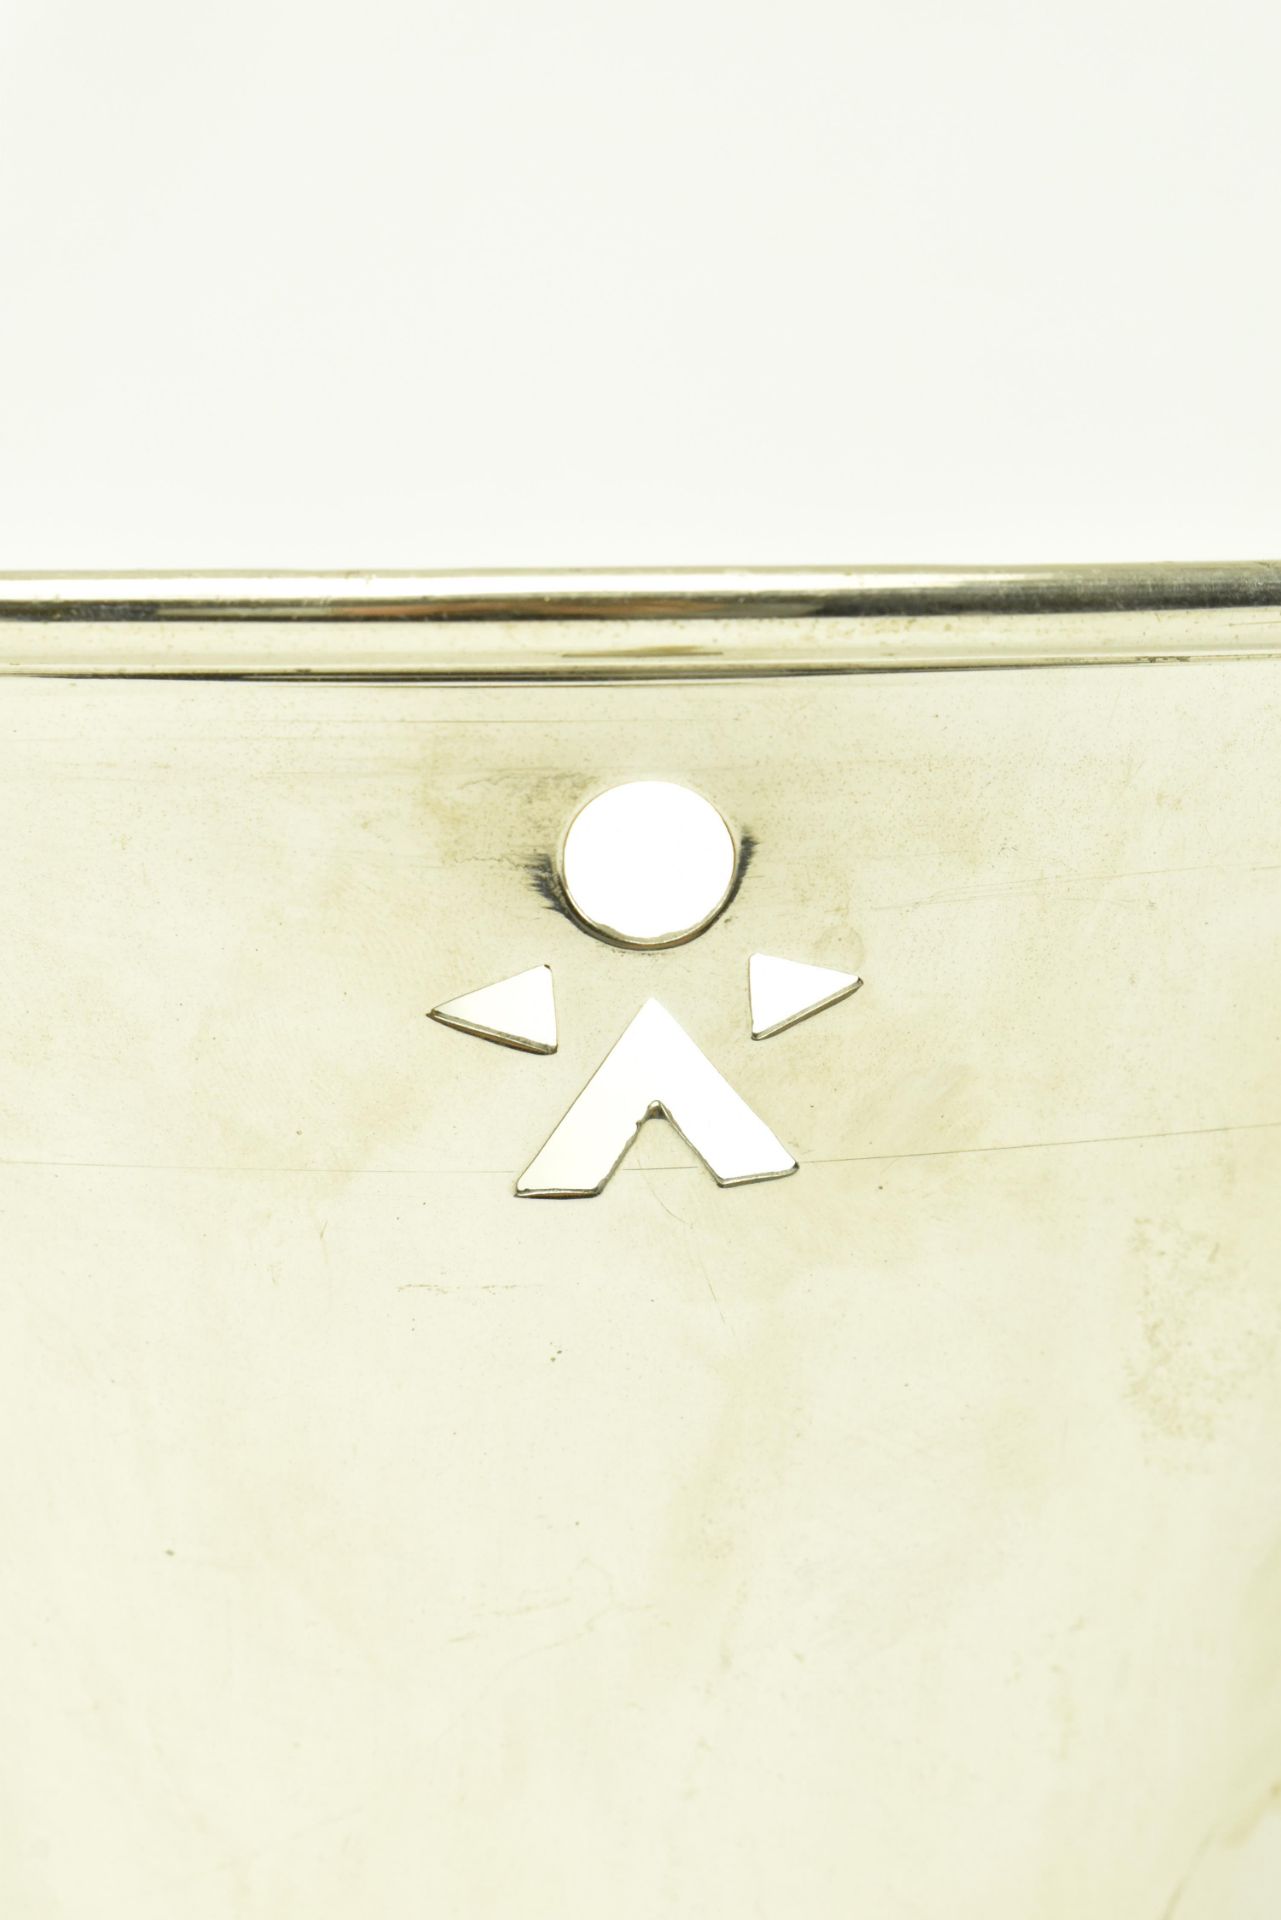 PHILIPPE STARCK (MANNER OF) - LATE 20TH CENTURY COOLER - Image 5 of 6